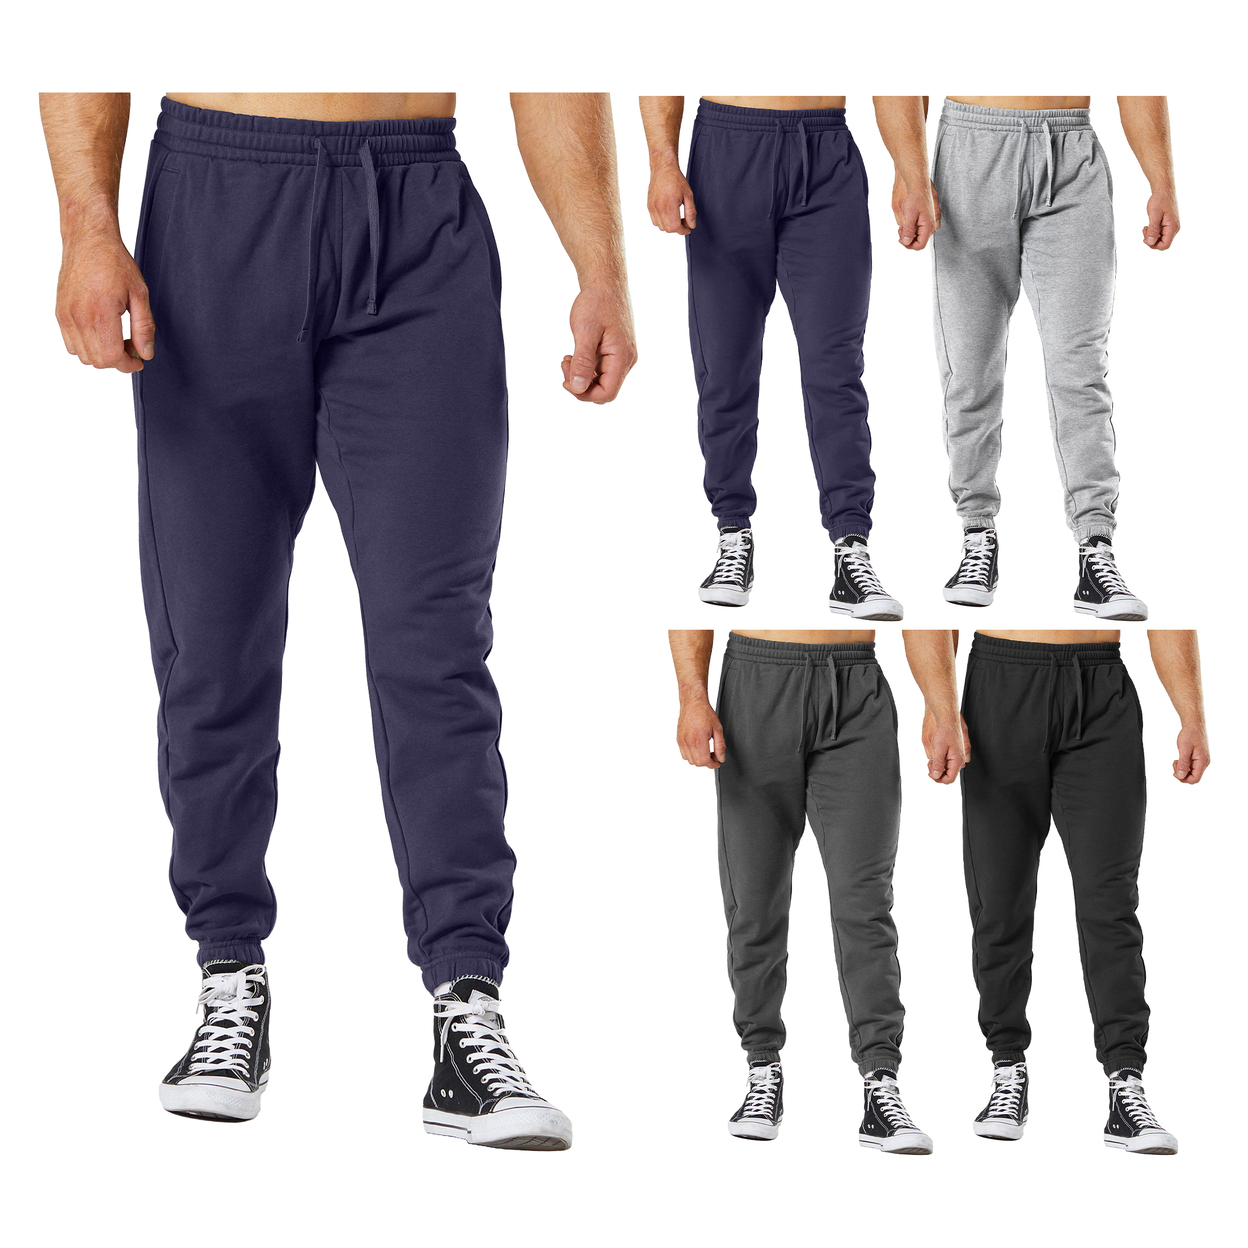 4-Pack: Men's Ultra-Soft Cozy Winter Warm Casual Fleece-Lined Sweatpants Jogger - Small